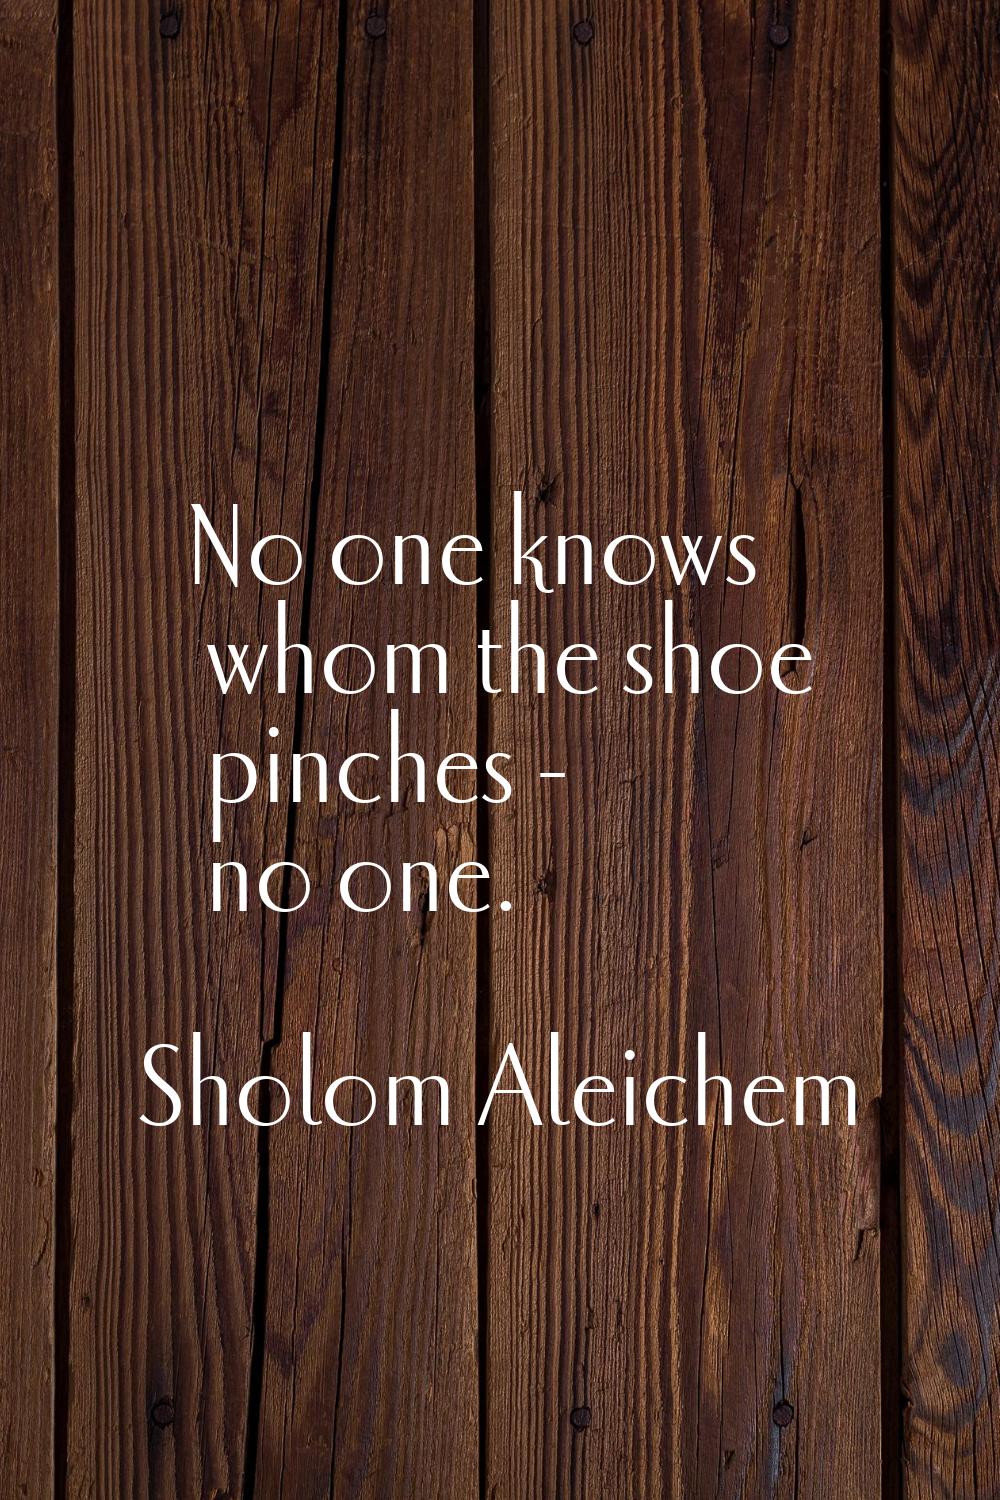 No one knows whom the shoe pinches - no one.